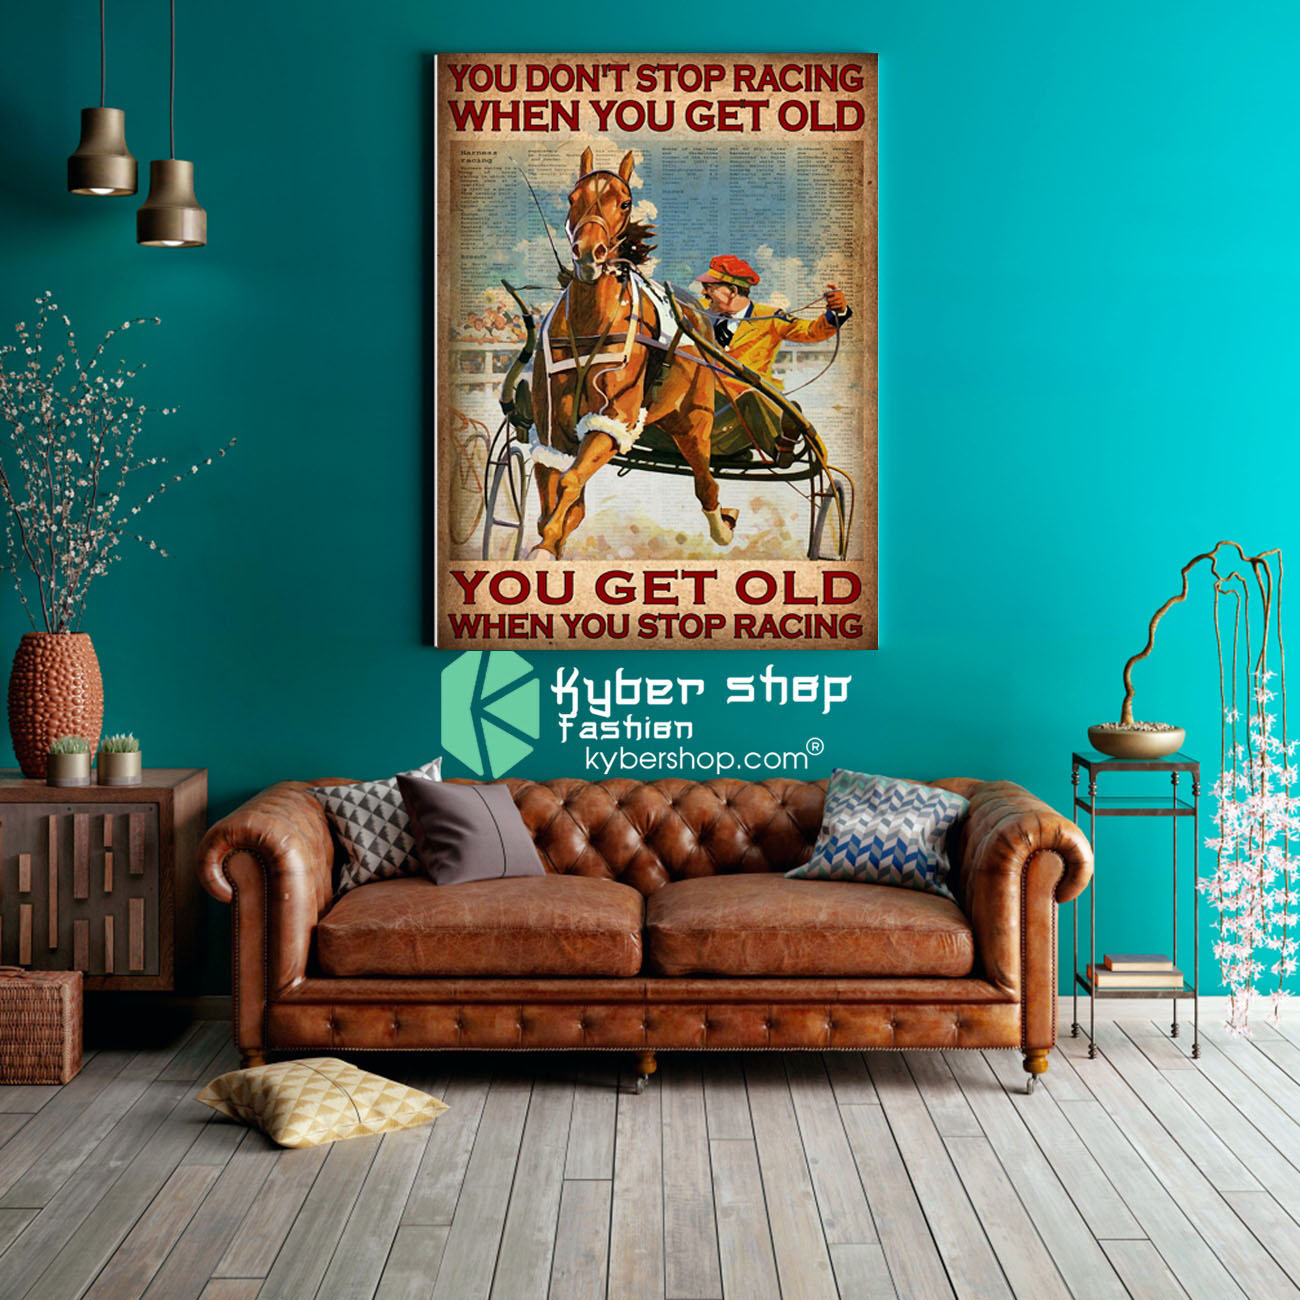 You don't stop racing when you get old poster8